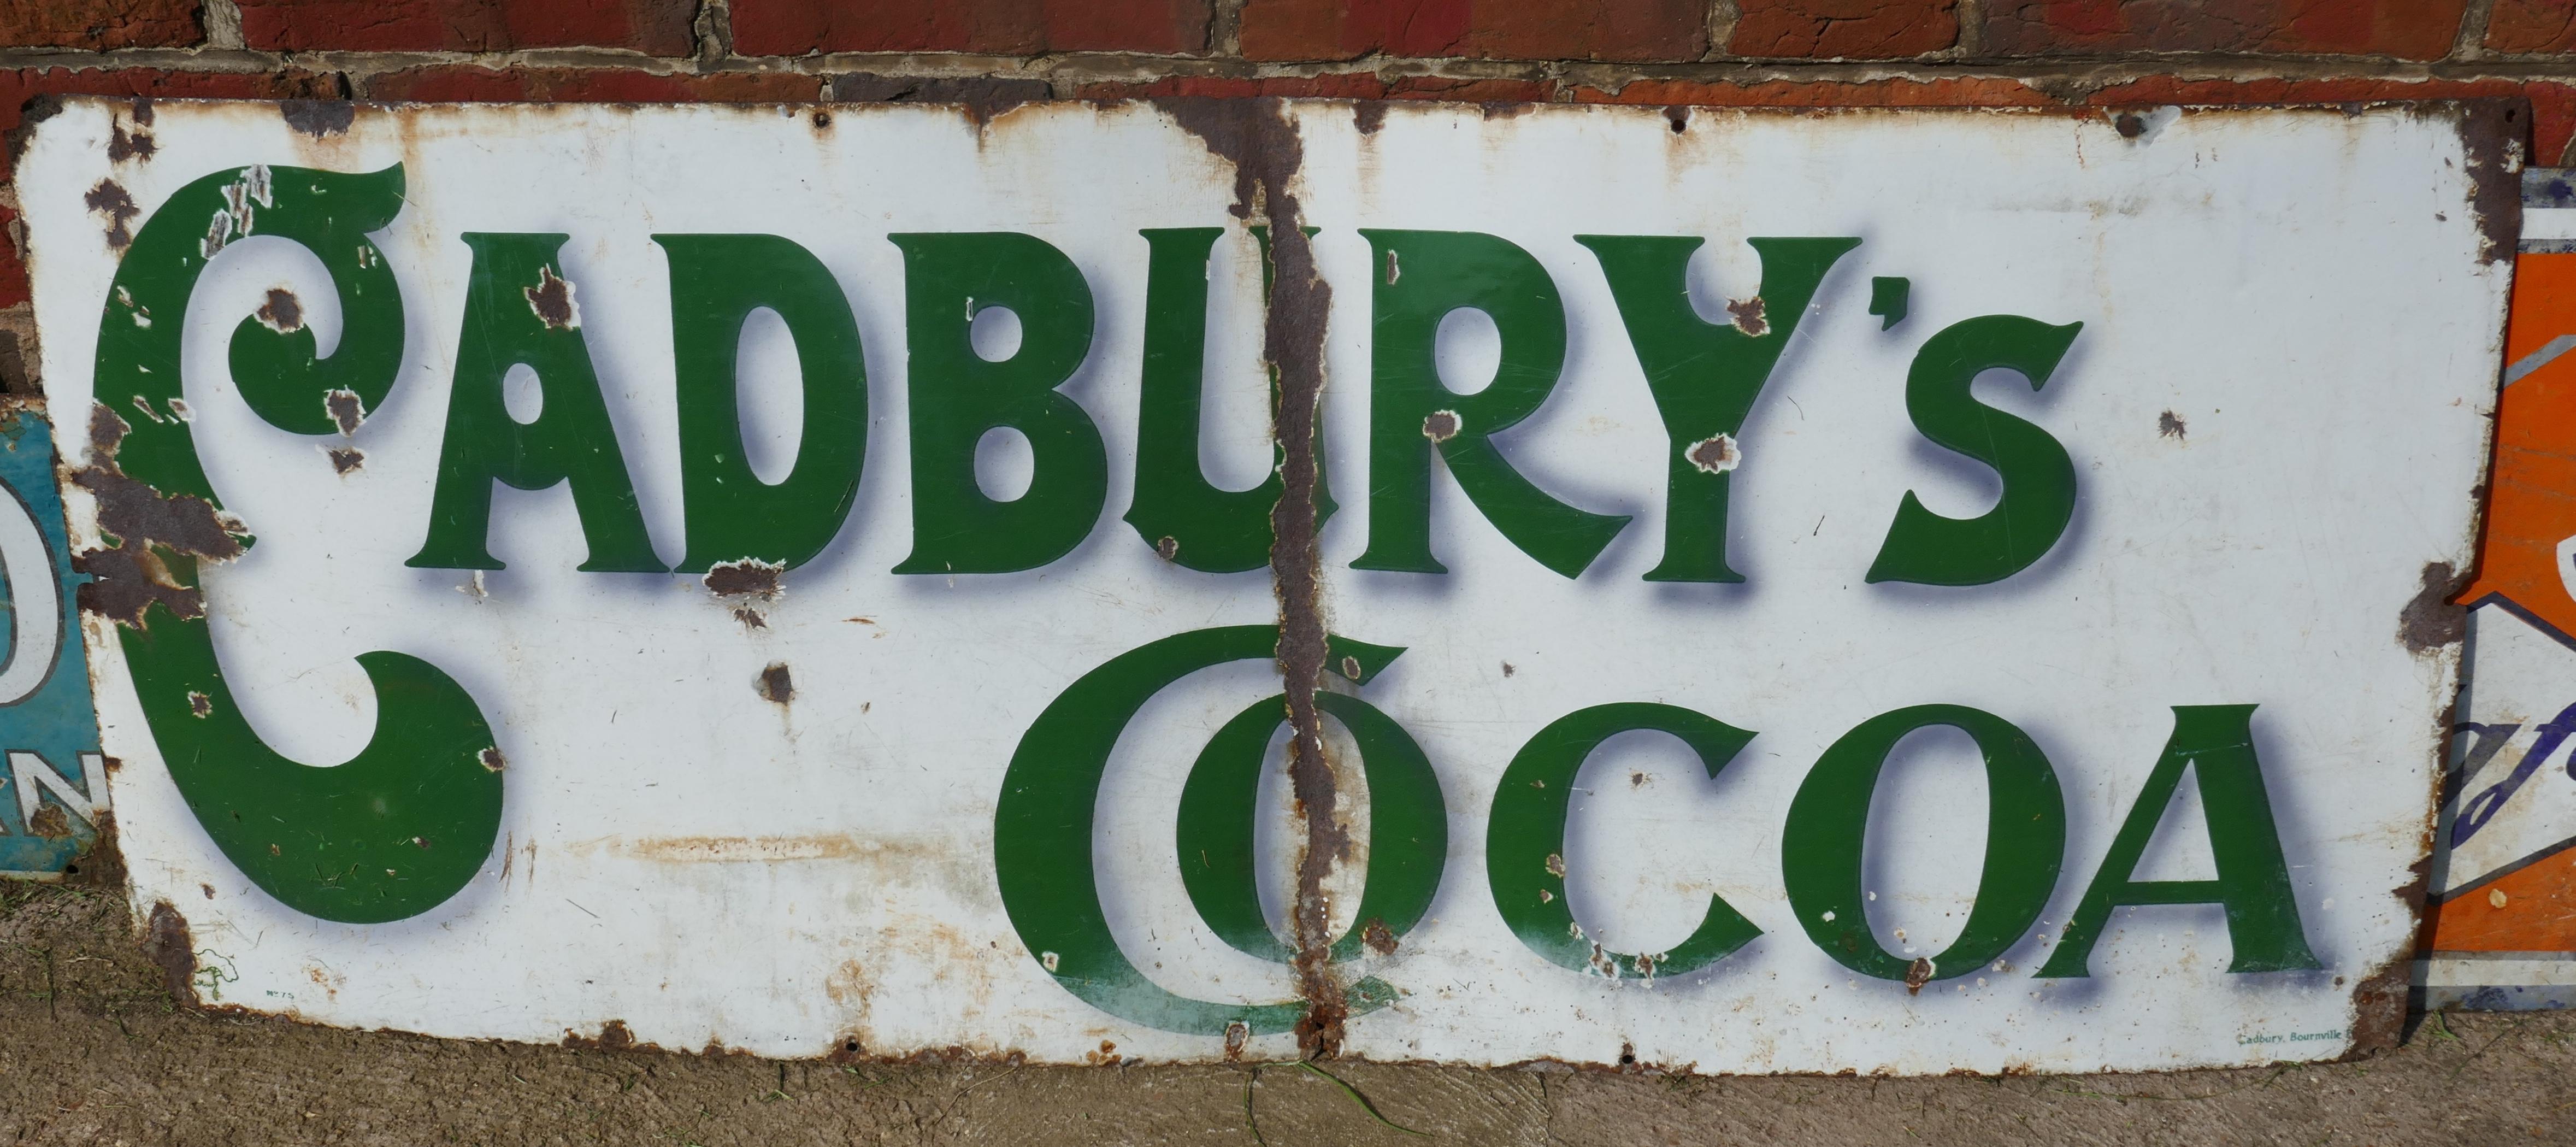 Rare early Cadbury’s Cocoa enamel sign 

Very rare old sign, this is one of the earliest Cadbury signs, it has green writing on a white background, it is made in ceramic enamel

The sign has had a rough life, it looks like someone has tried to